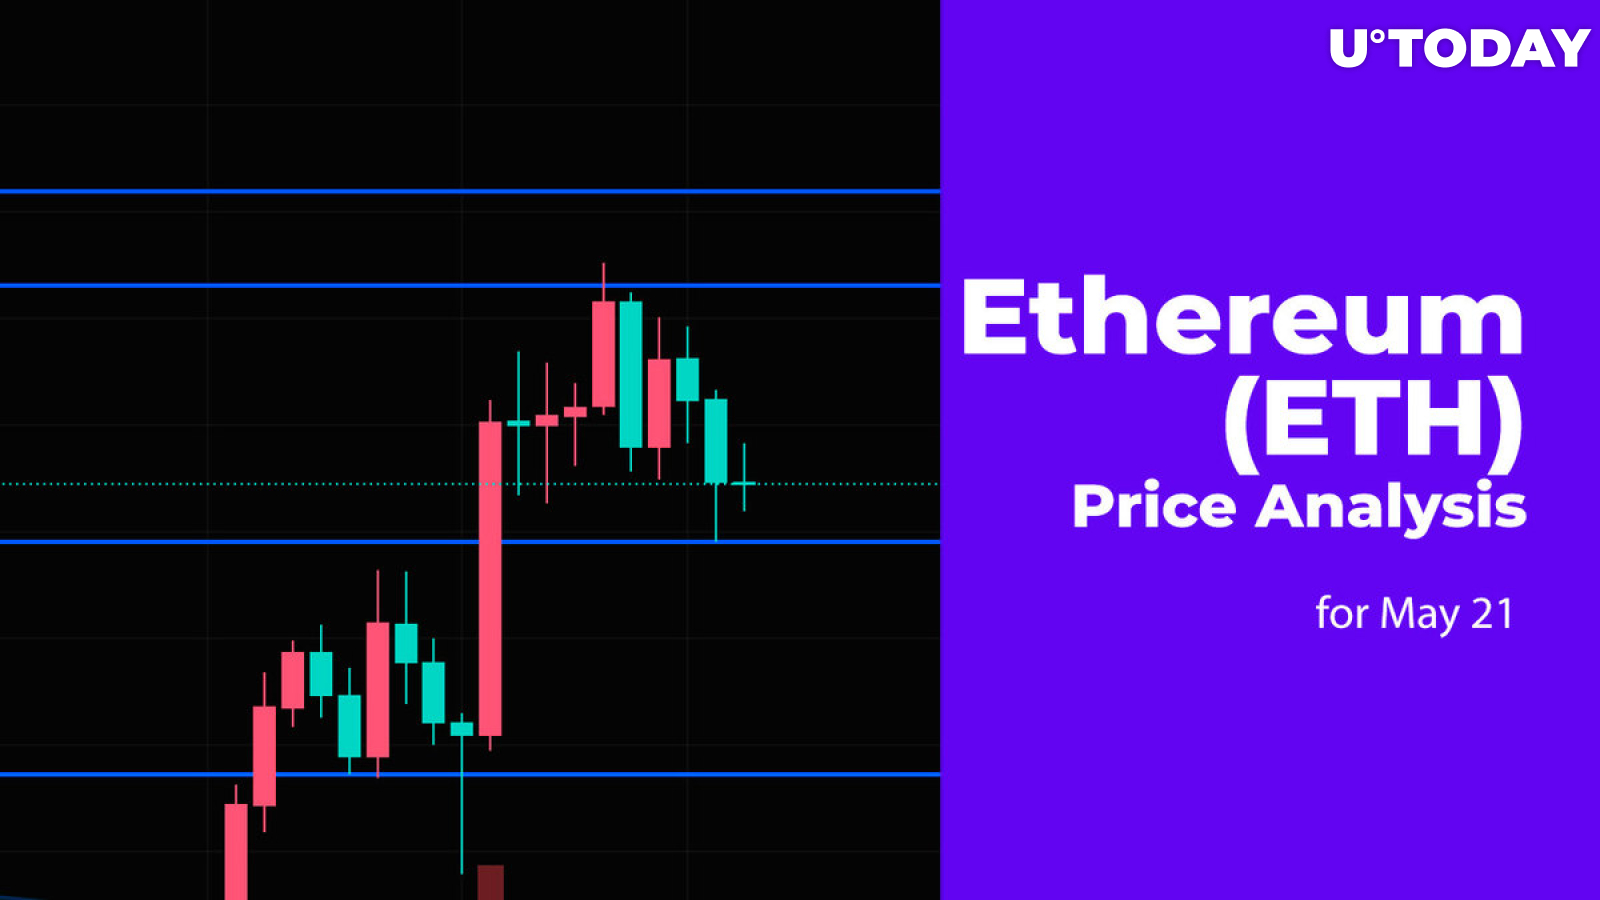 Ethereum (ETH) Price Analysis for May 21